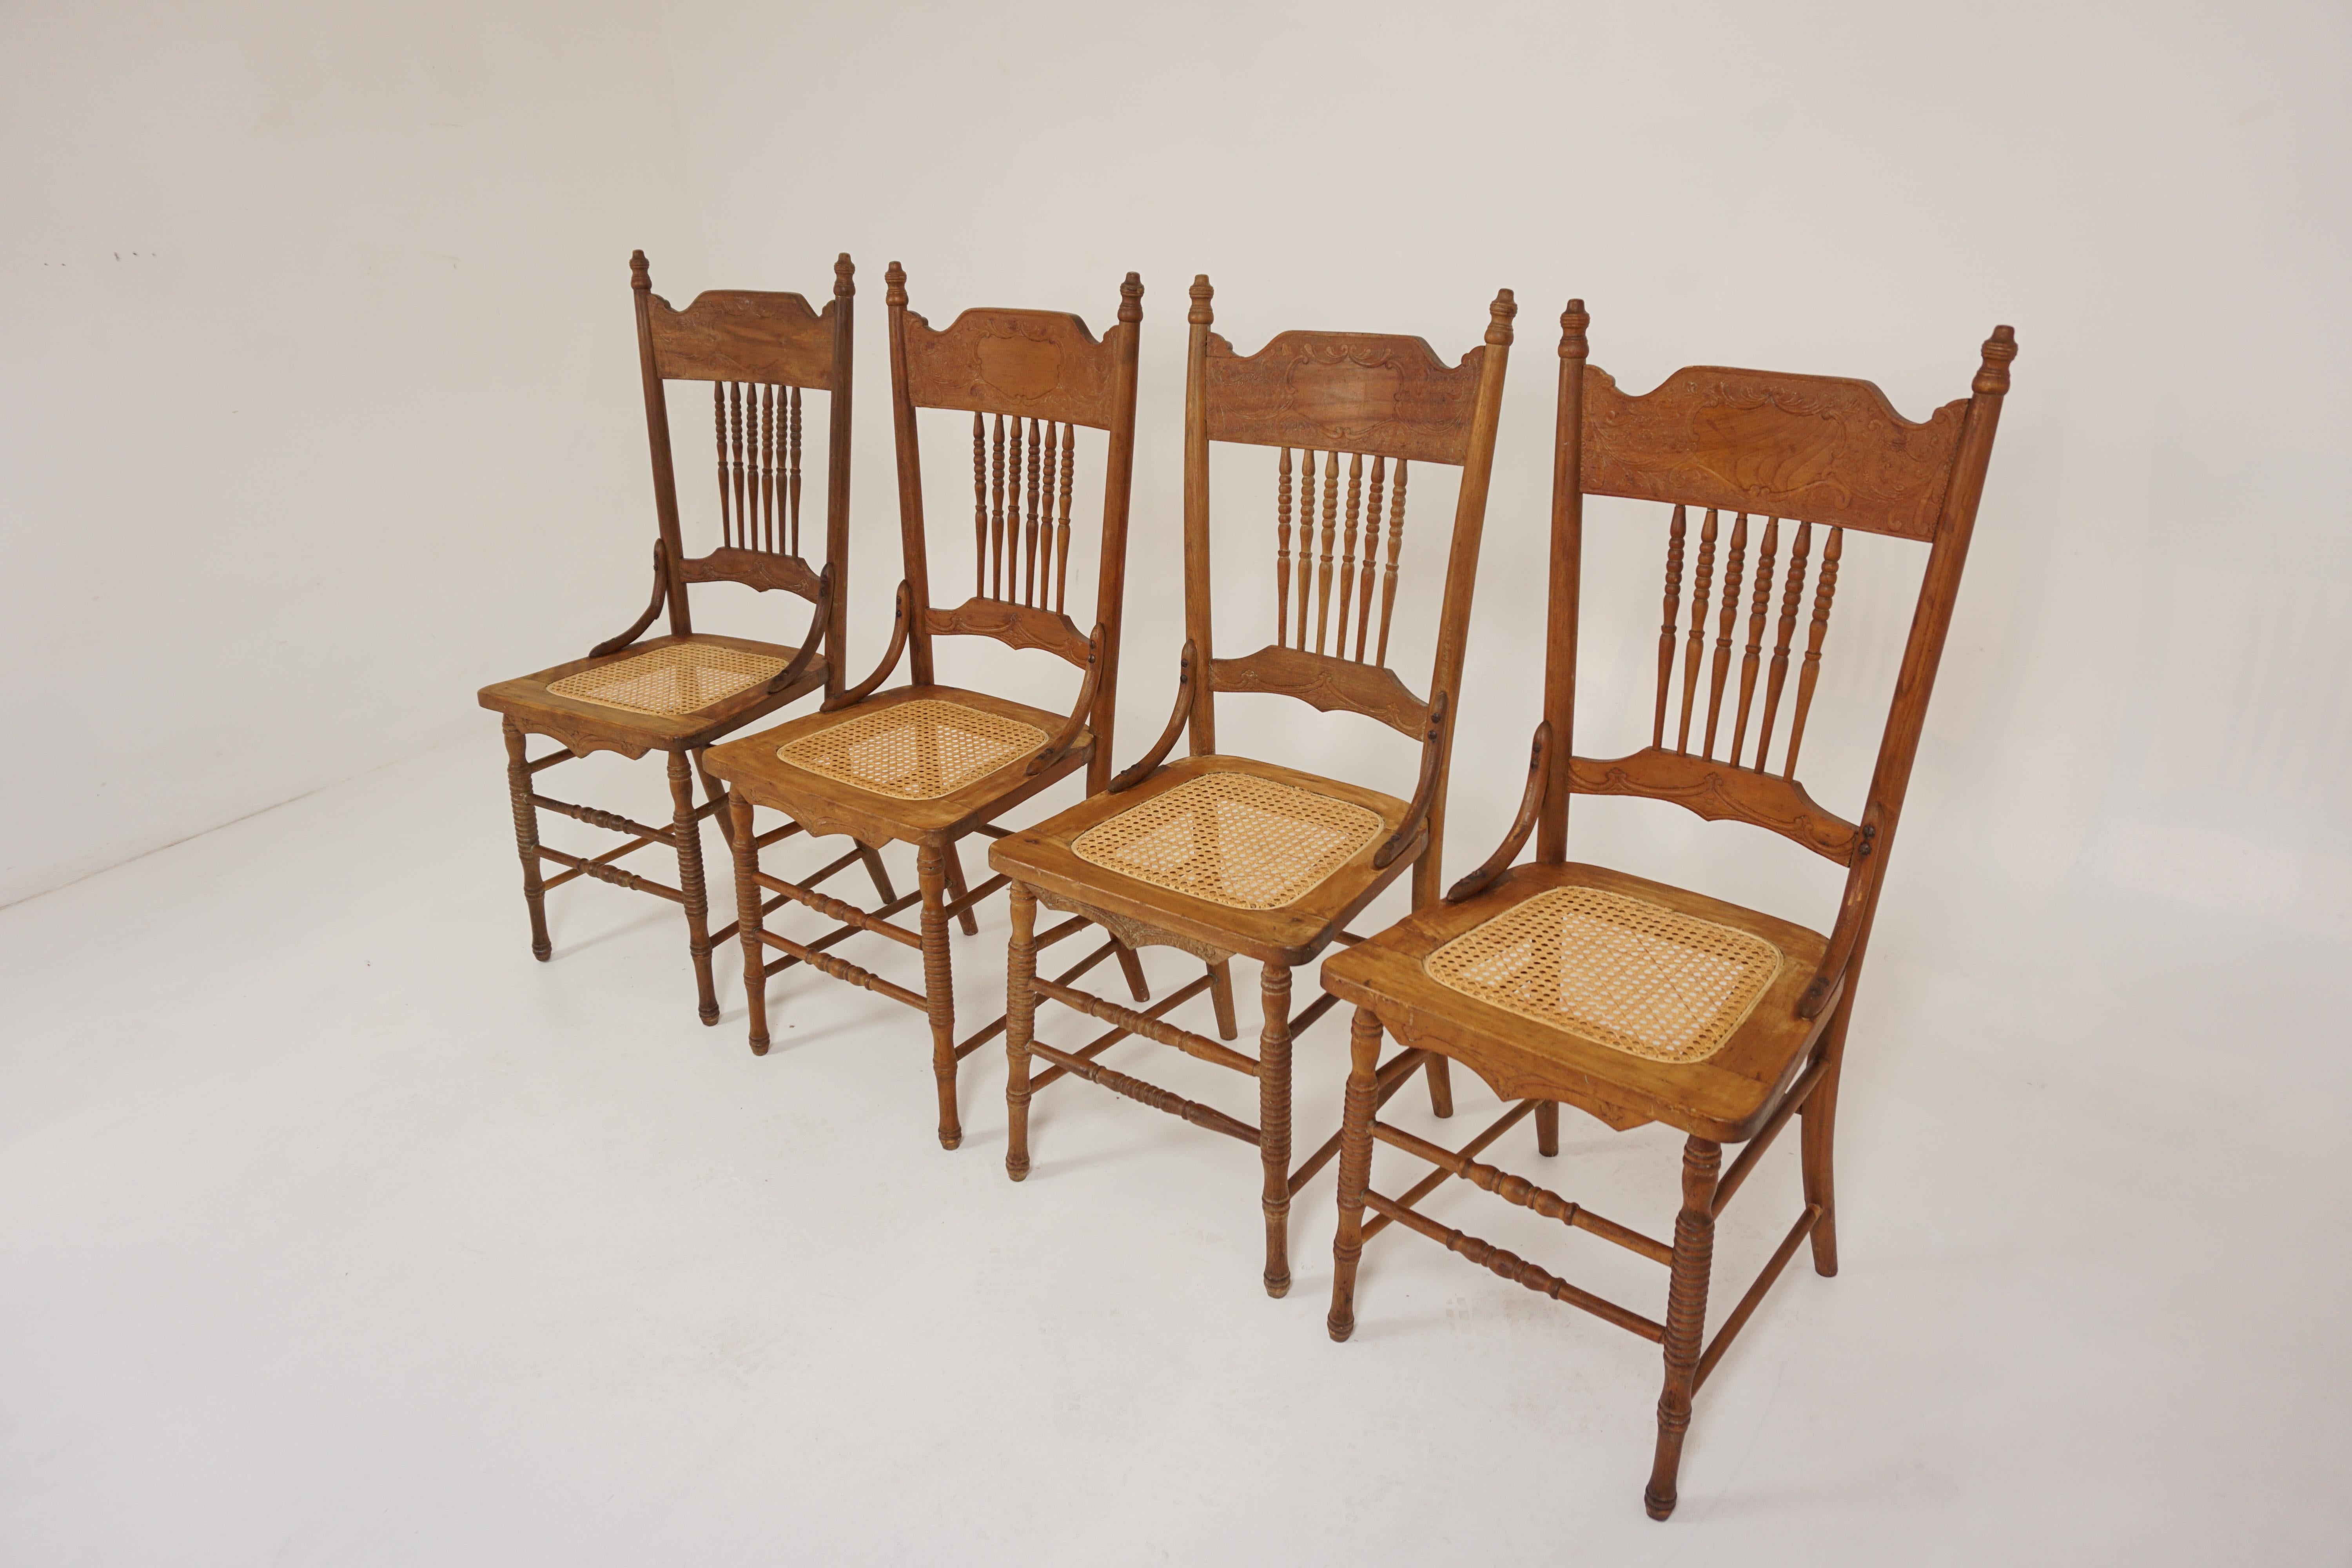 Set of 4 Antique Pressed Back Kitchen Chairs, American 1900, B2908

American 1900
Solid Beechwood
Original Finish
Carved Top Rail 
Pair of turned supports with finials on top
Carved slat
All standing on four turned legs
United by turned